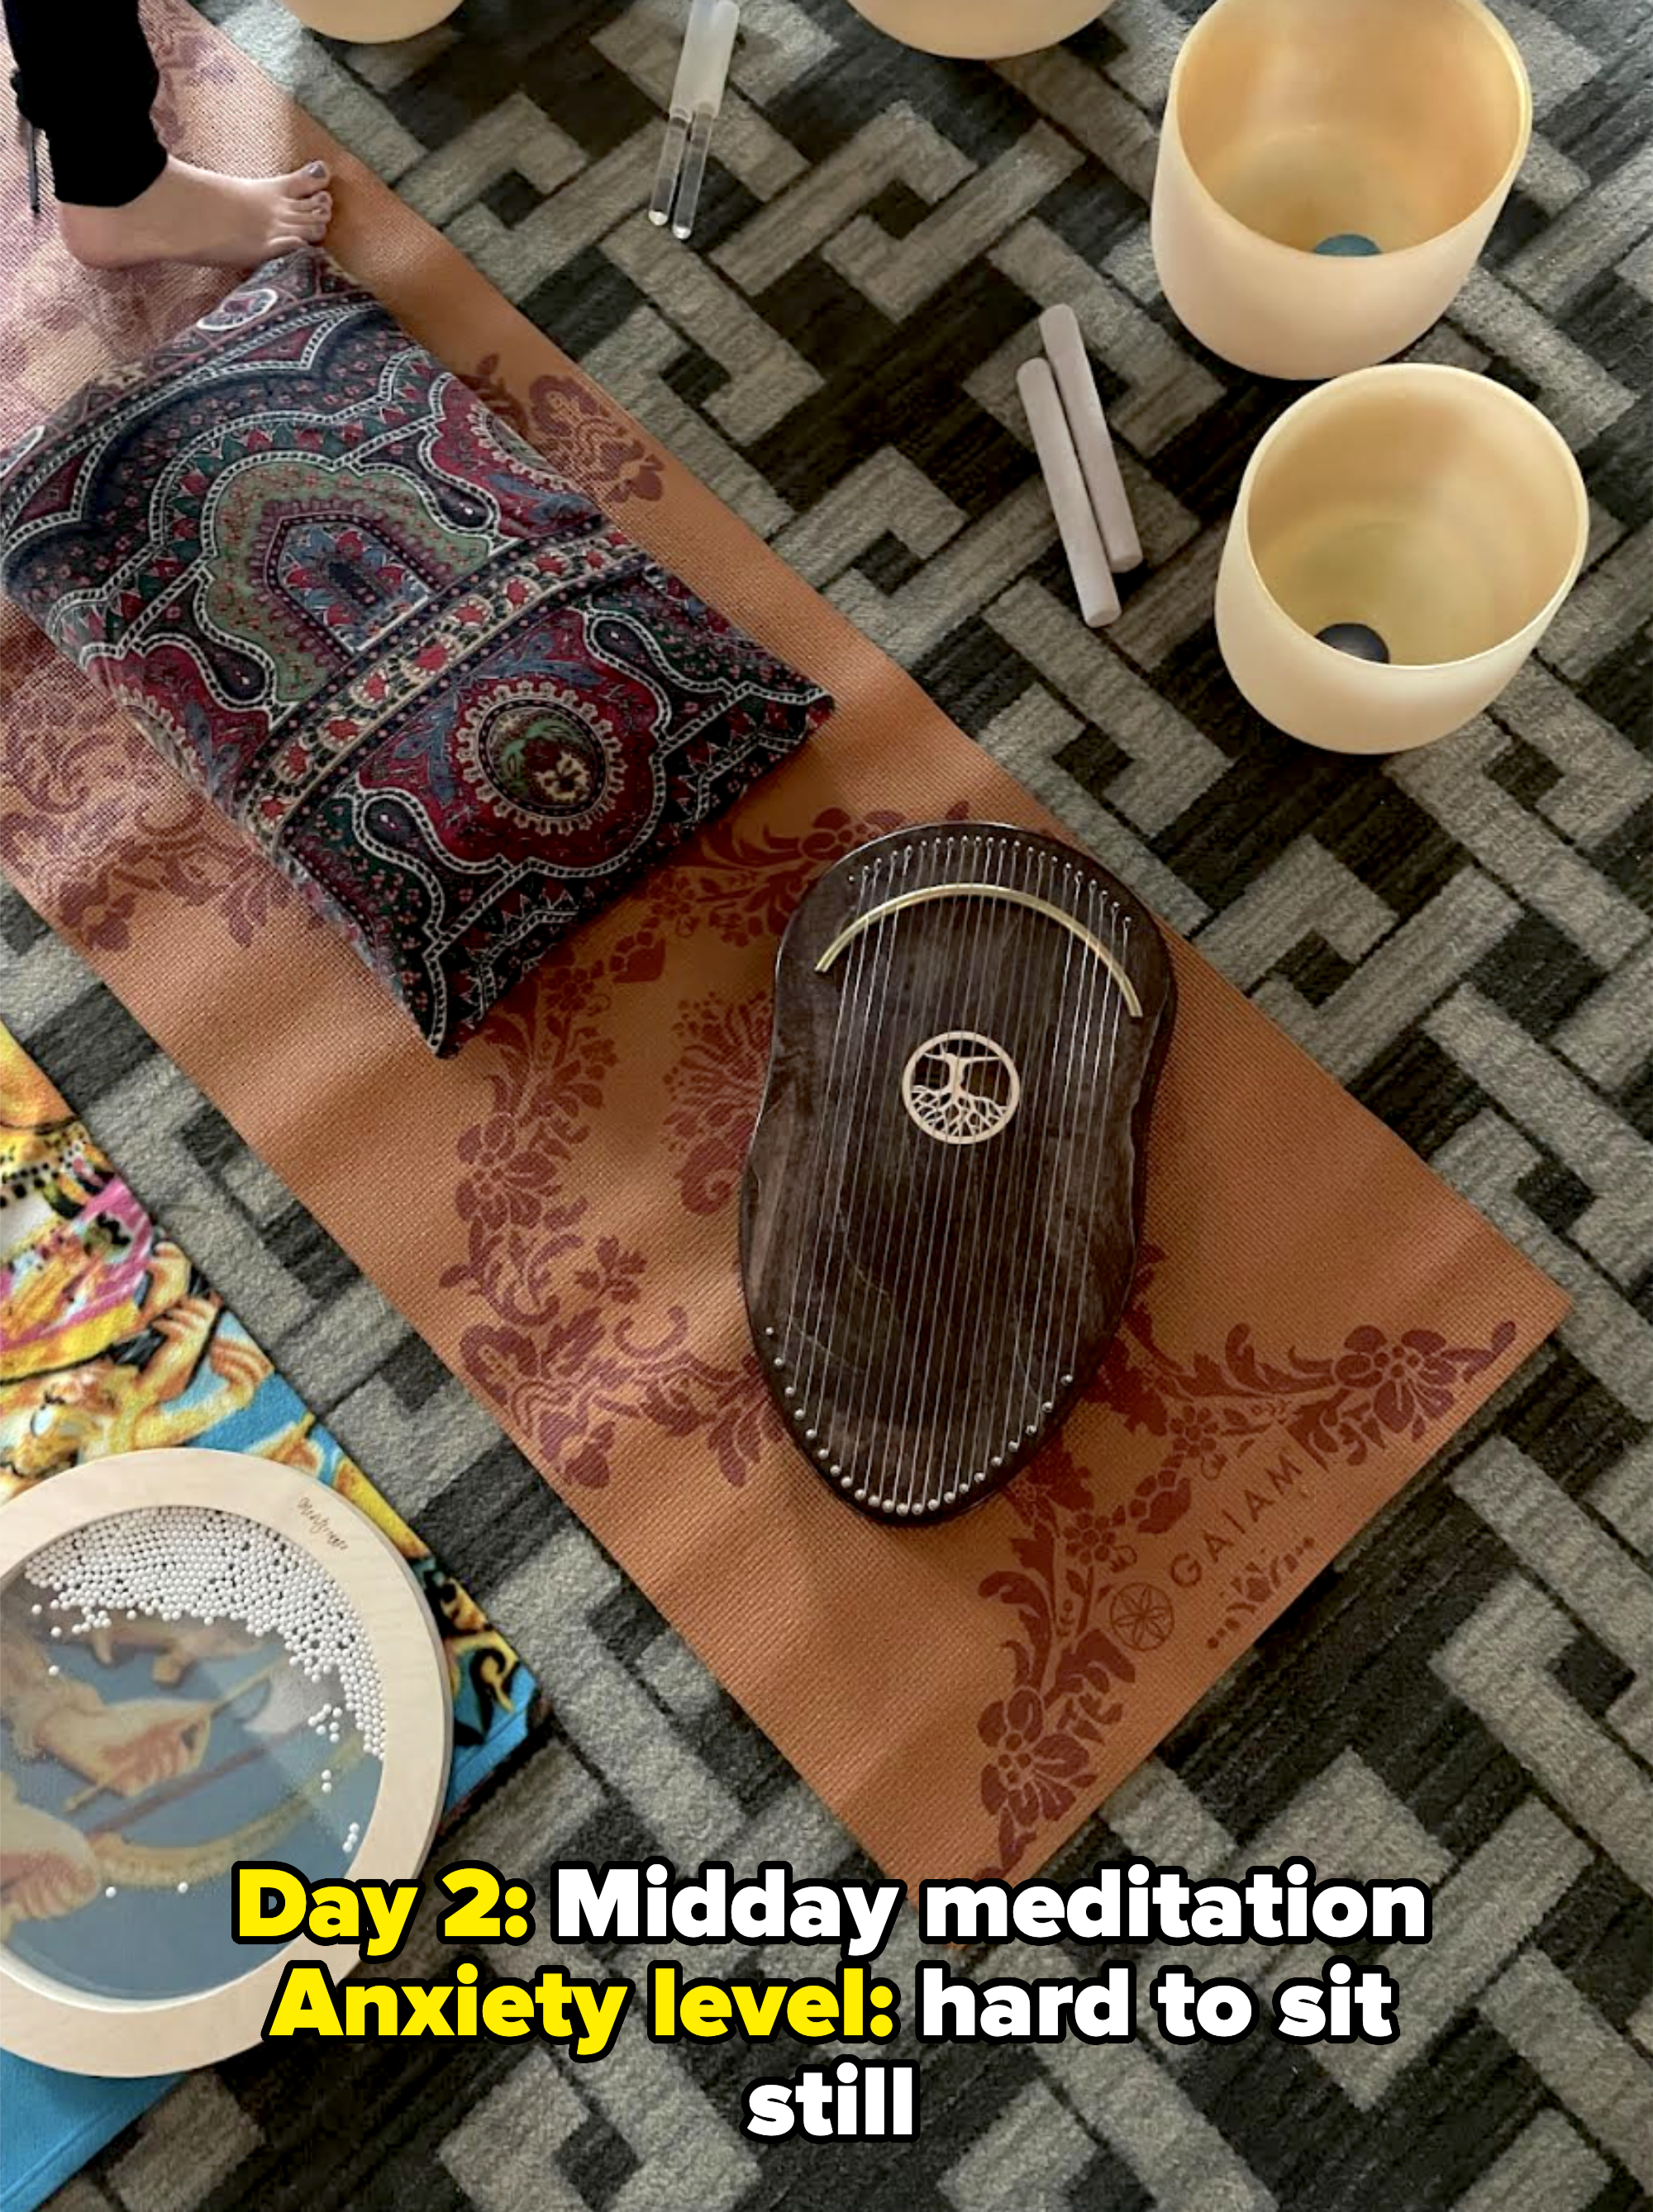 Feet standing near a patterned cushion, a musical instrument, and sound bowls on a patterned mat, indicating a meditative or sound healing setup